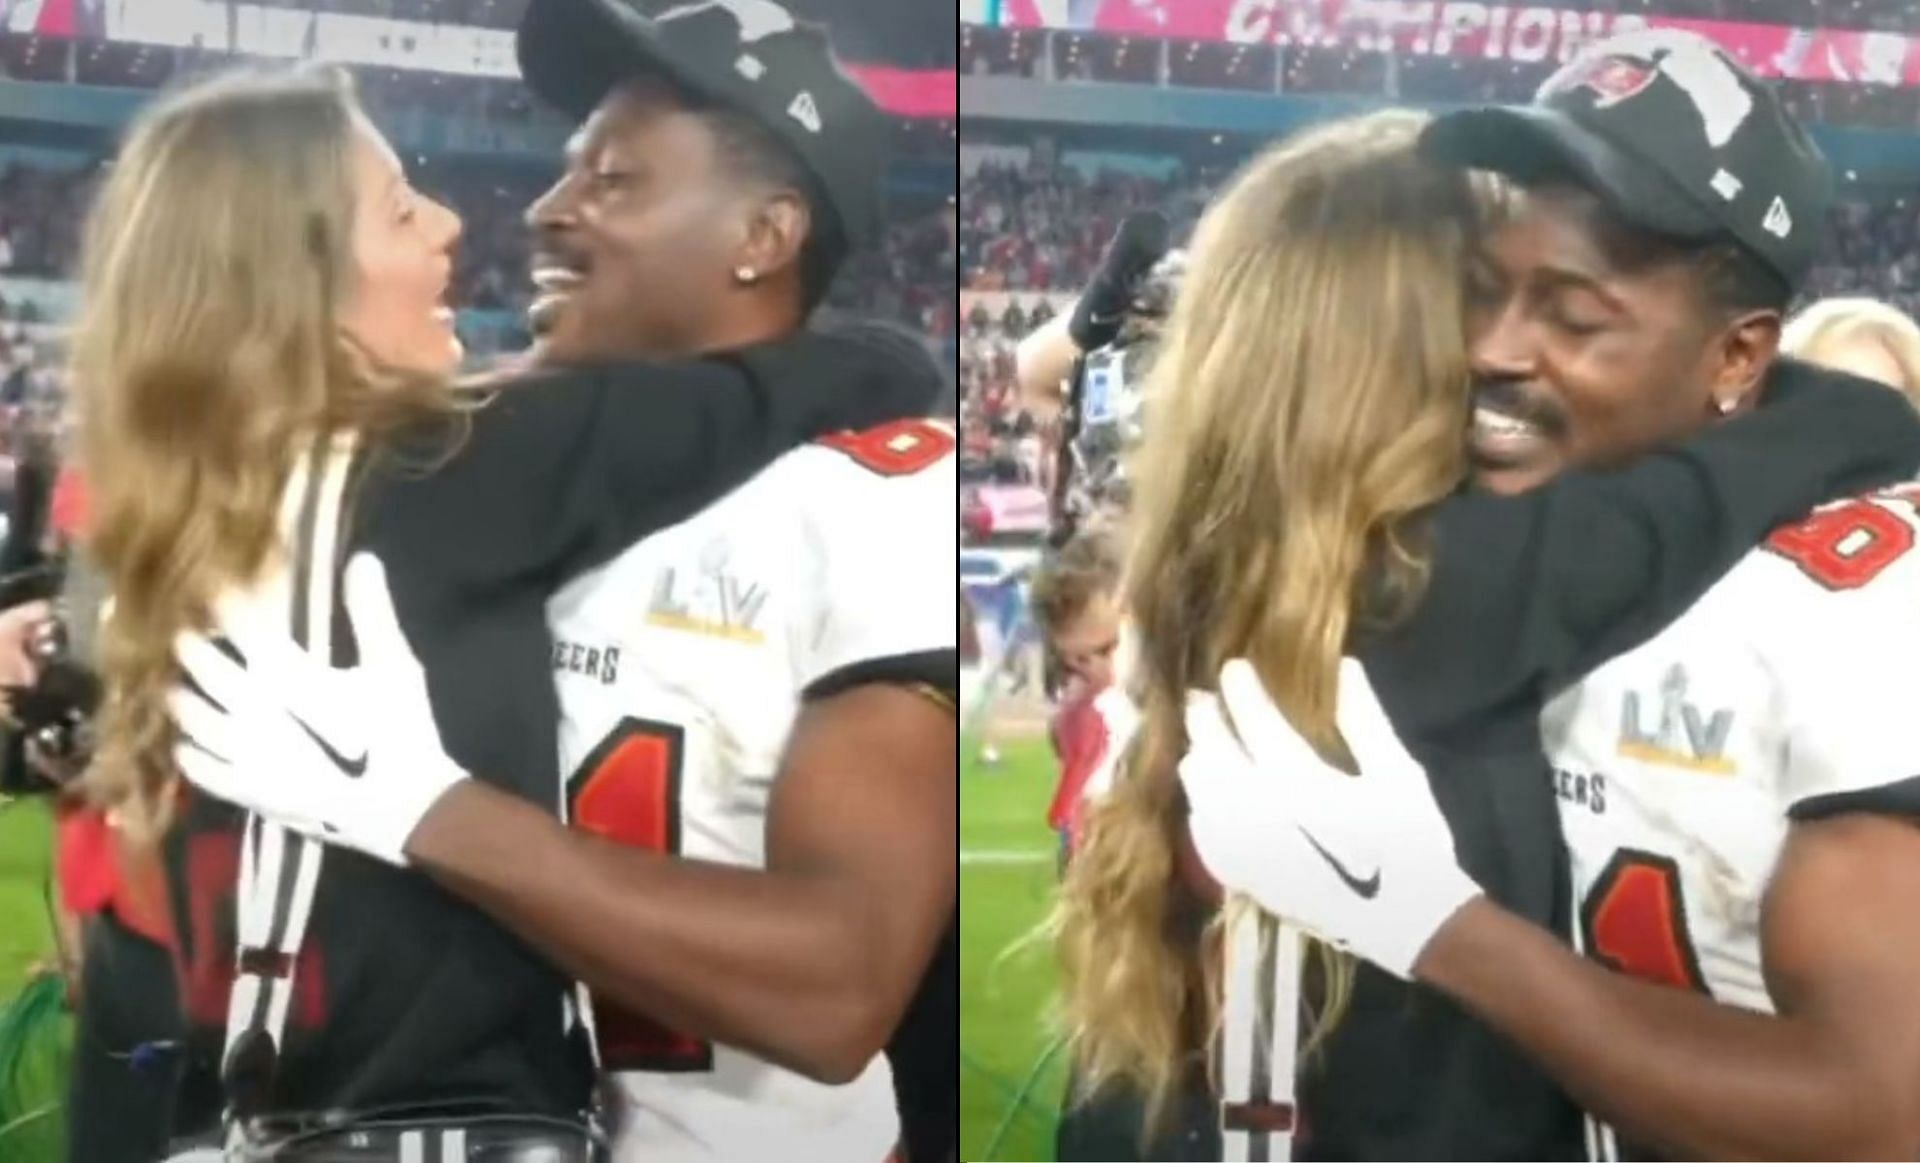 Antonio Brown Posted With Gisele Bündchen On IG & Here's The Beef Between  Him And Tom Brady - Narcity